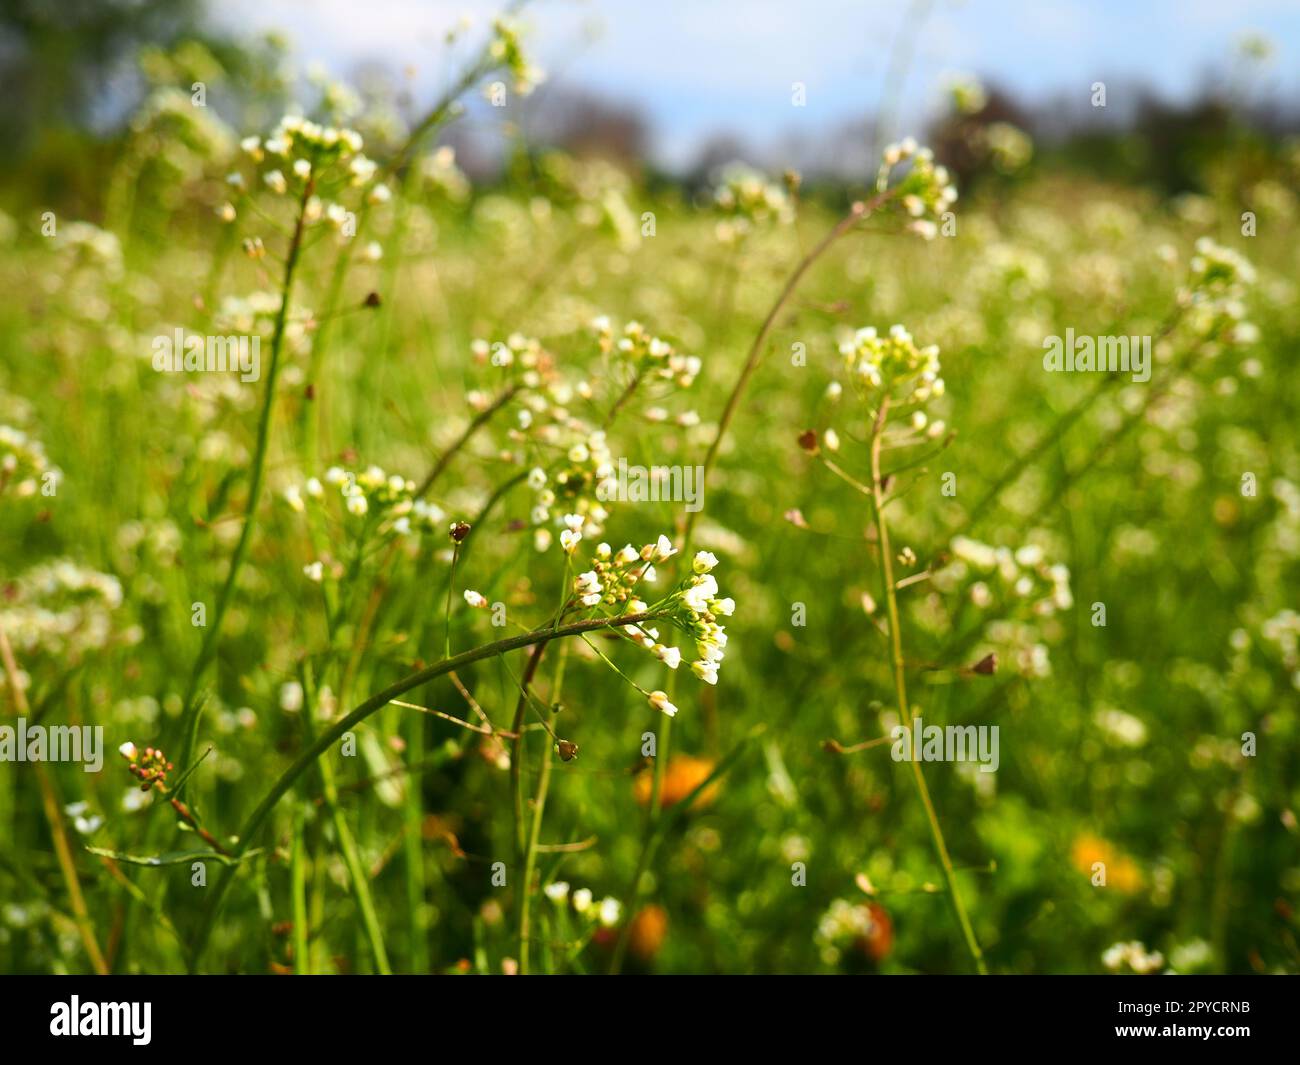 shepherds purse plant in the meadow capsella bursa pastoris meadow or field lawn in the forest blooming field grasses blooming wild meadow or pasture fresh green grass in spring white flowers 2PYCRNB